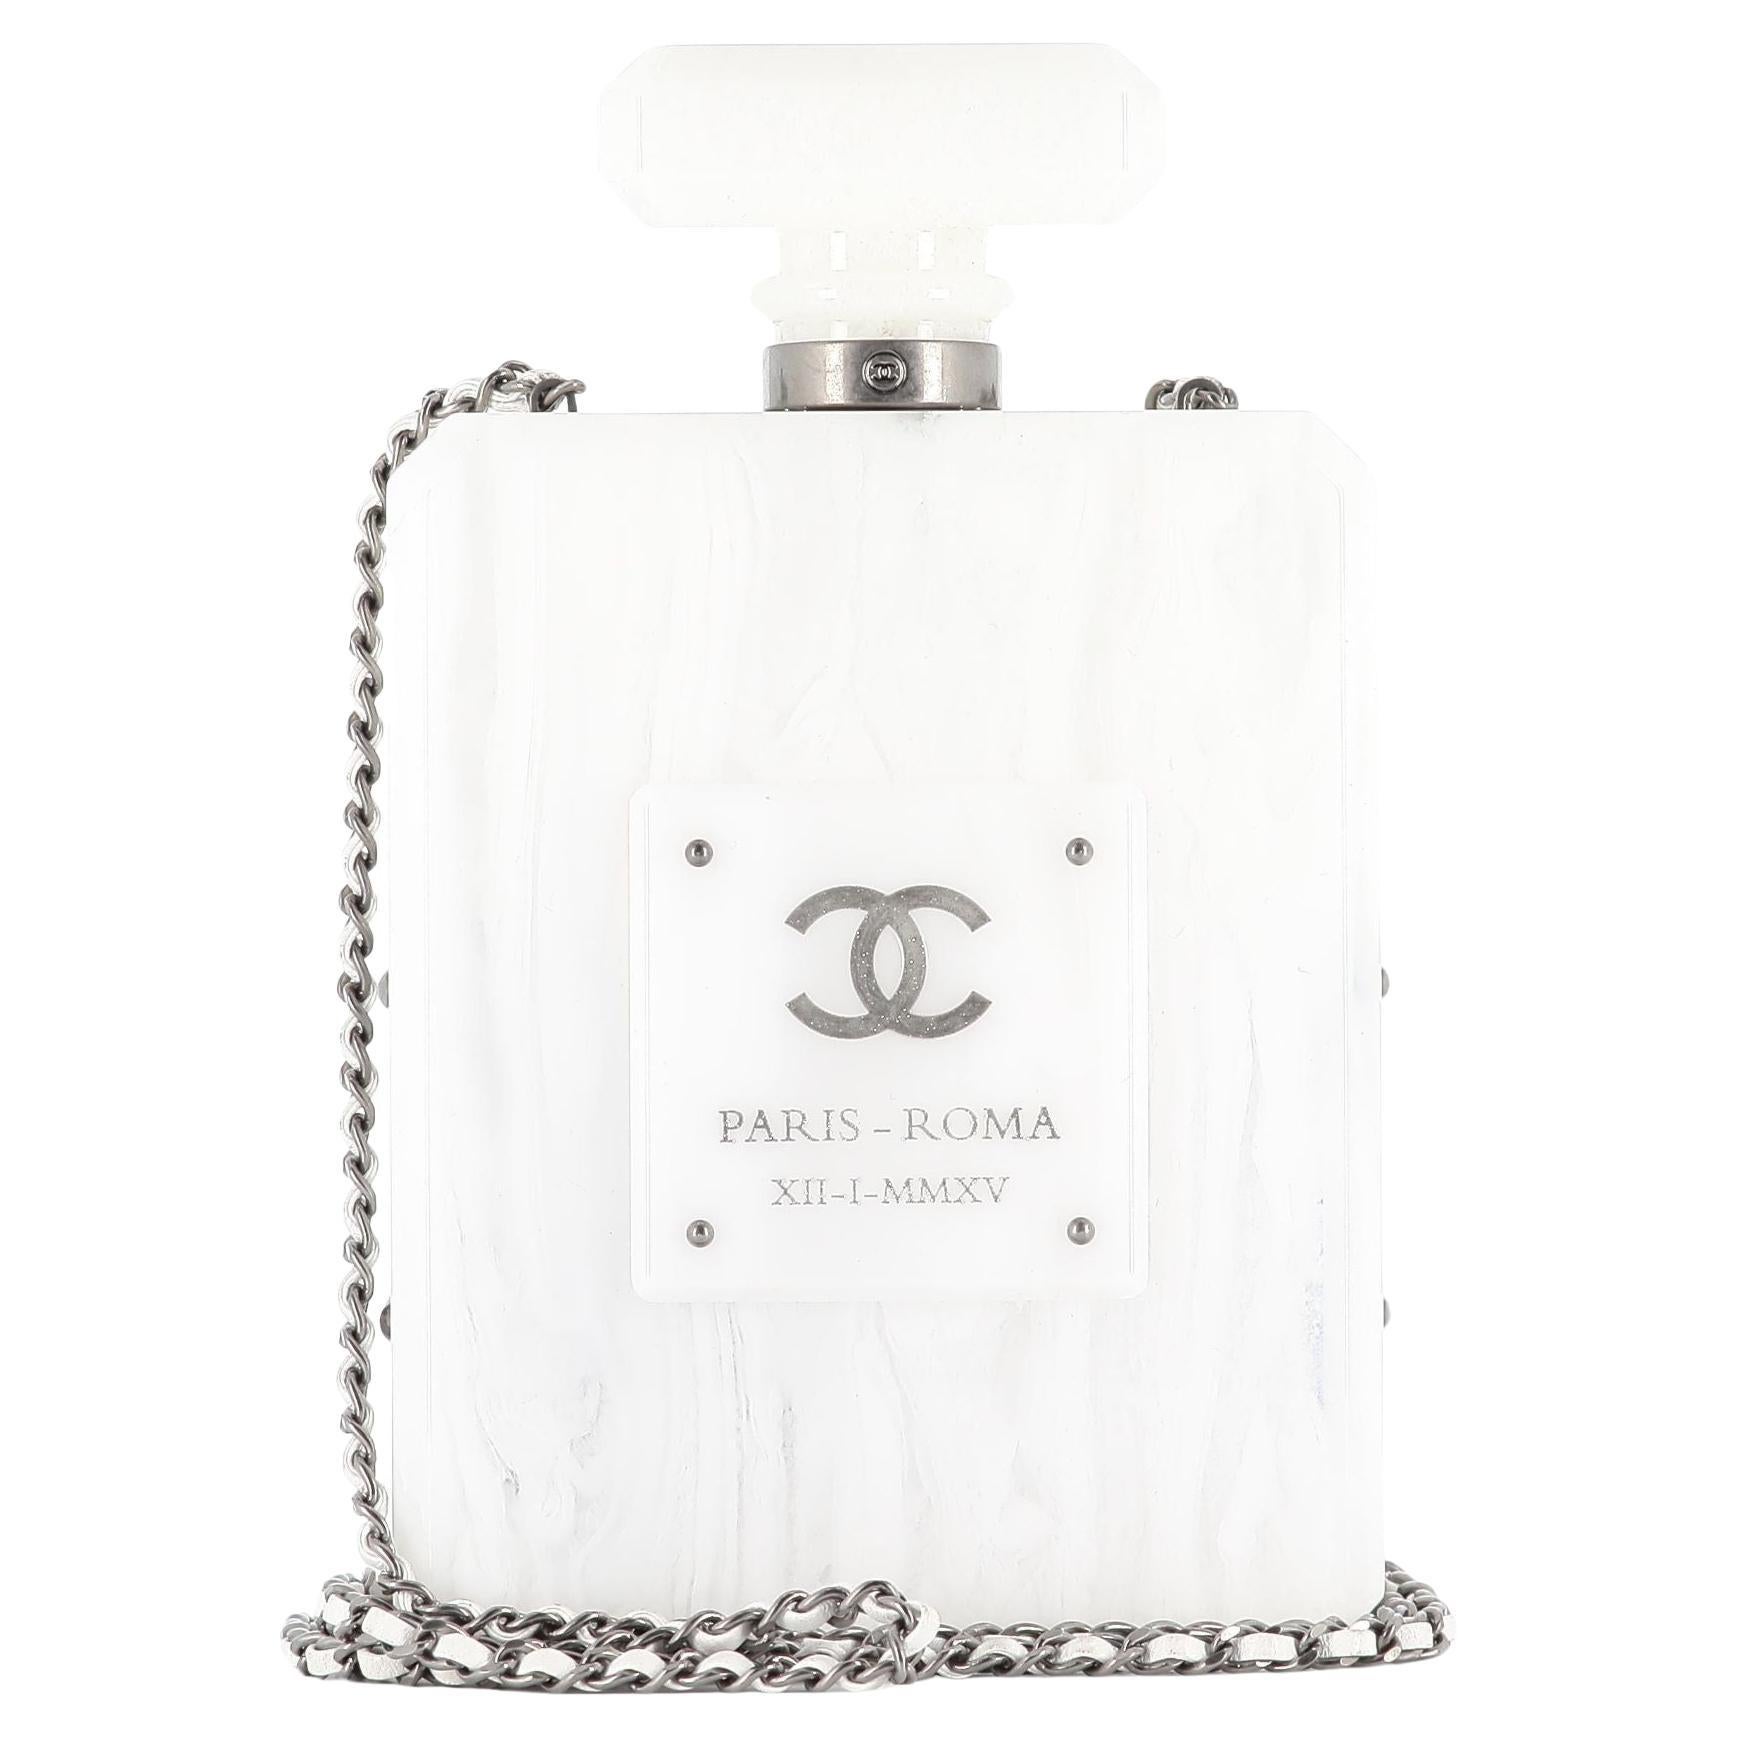 2016 Chanel N5 Paris Rome  Inspired Marble Lucite Bottle Clutch